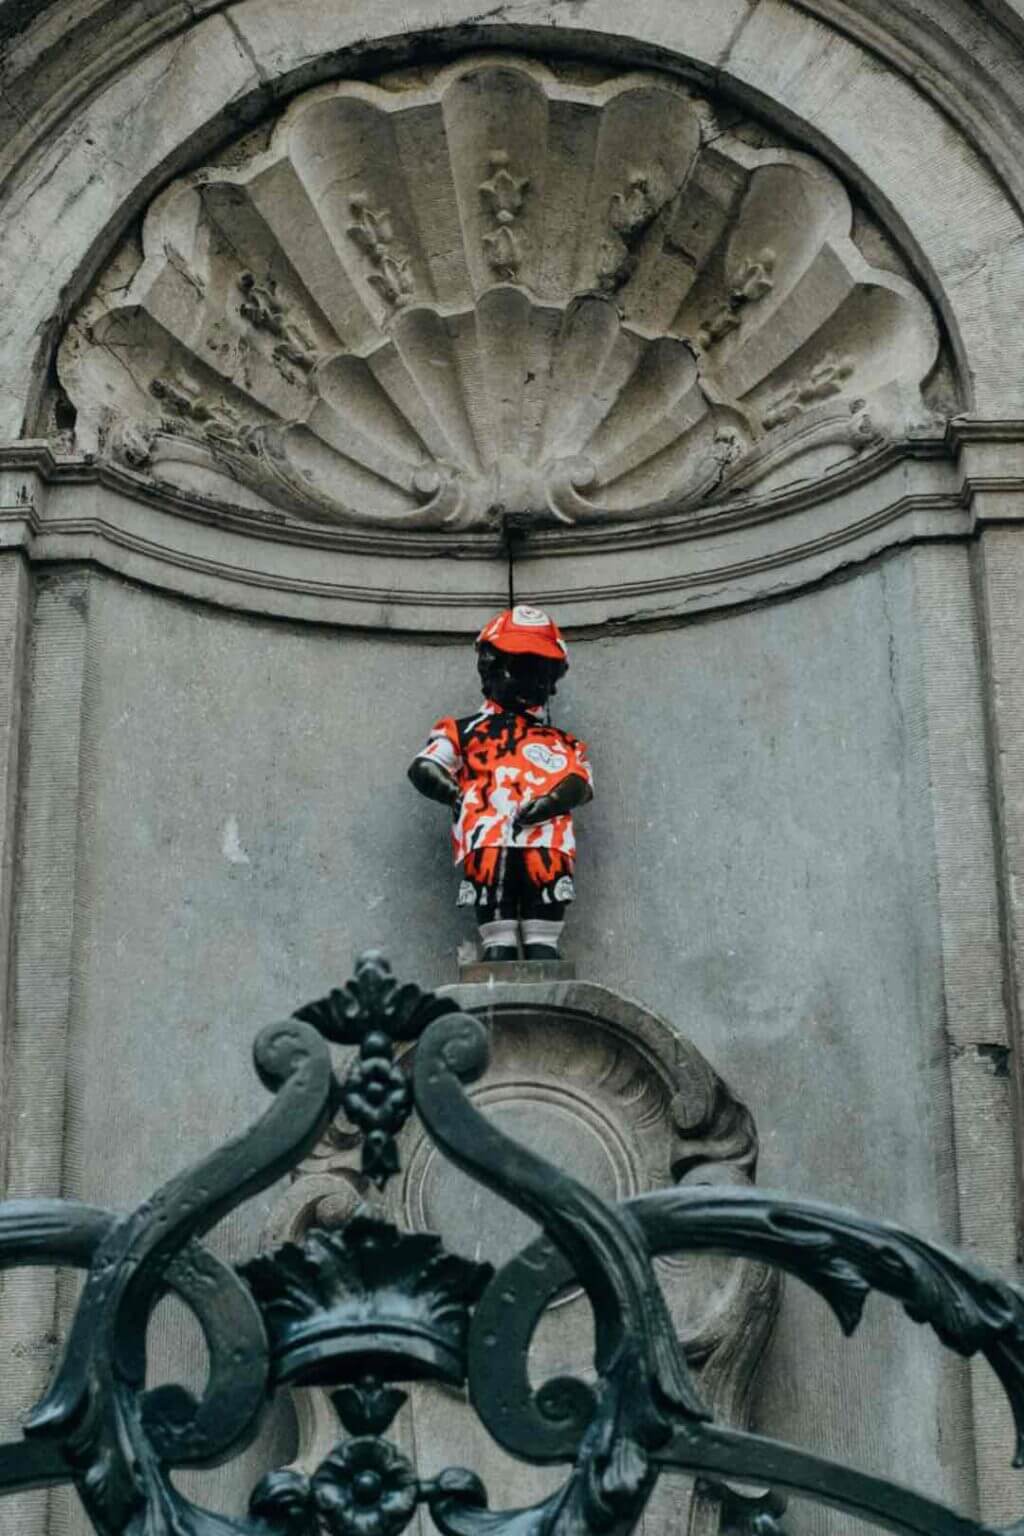 Manneken Pis all kitted out!